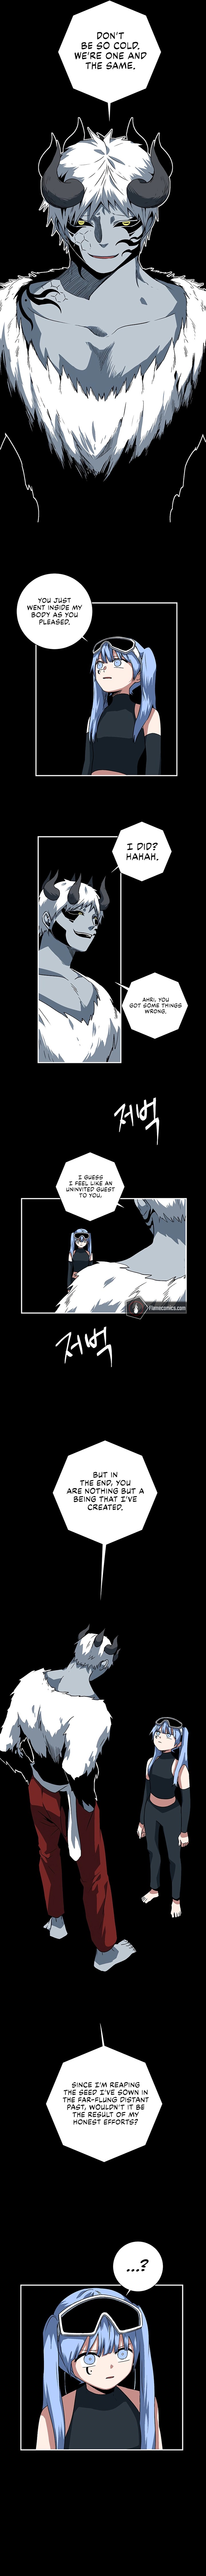 One Step For The Dark Lord Chapter 113 Page 3